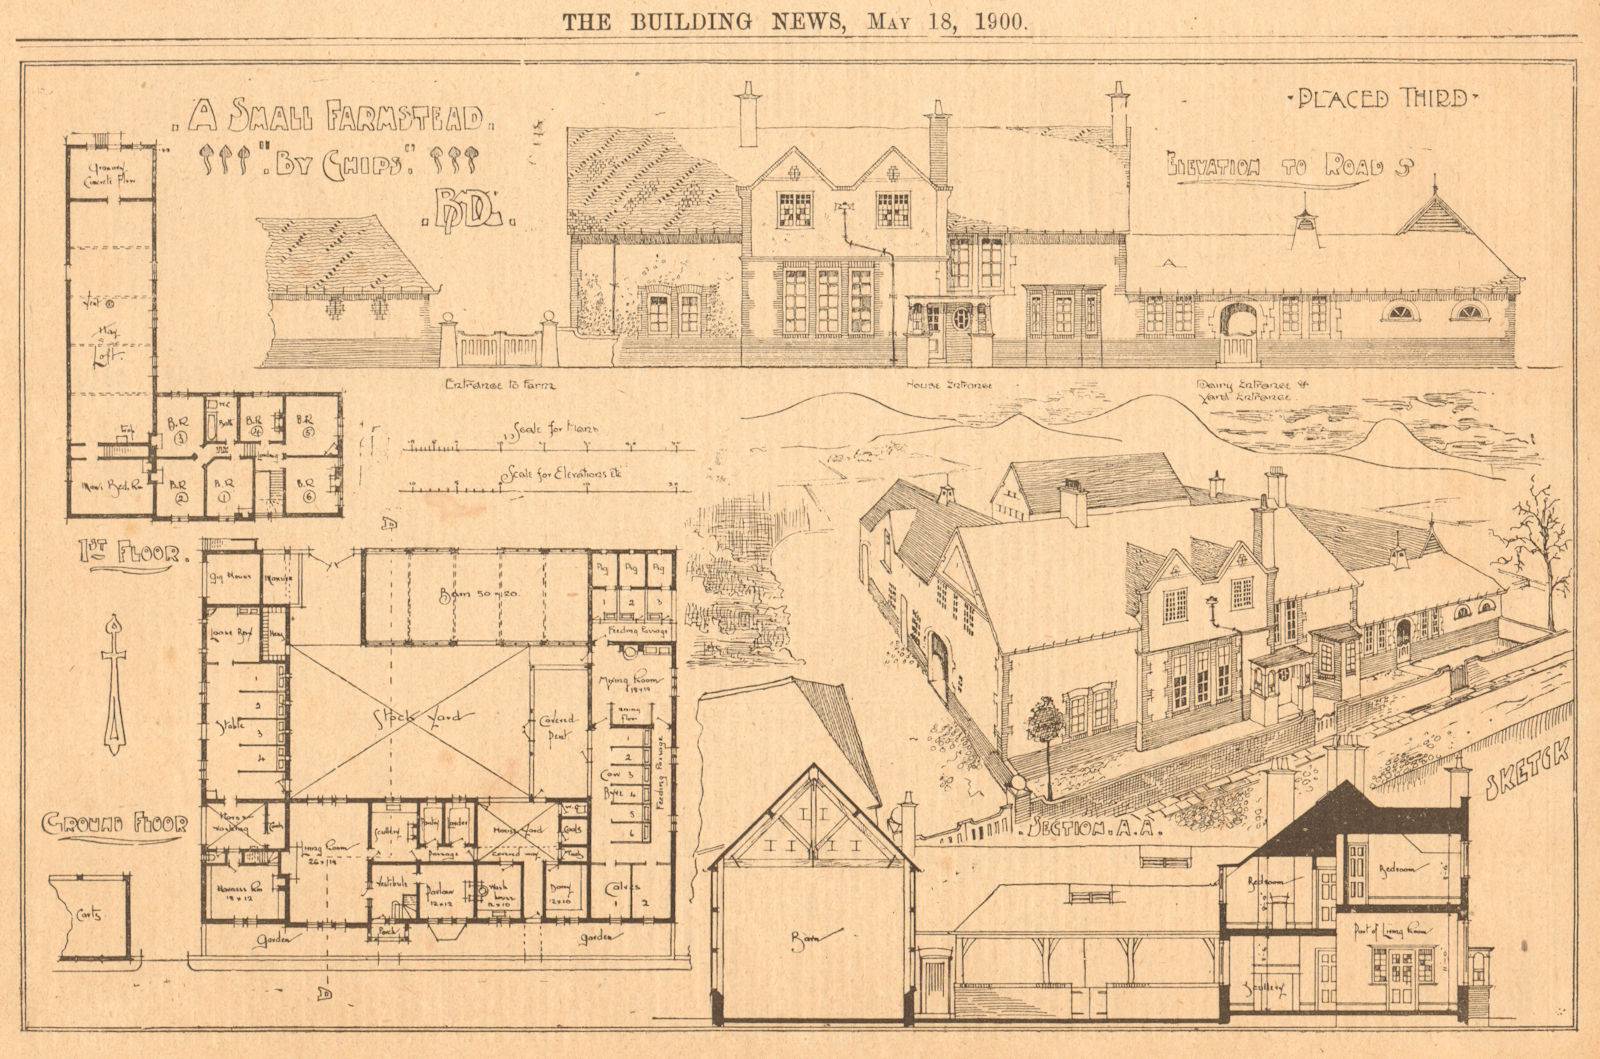 A small farmstead by Chips. Ground floor, 1st floor plan 1900 old print